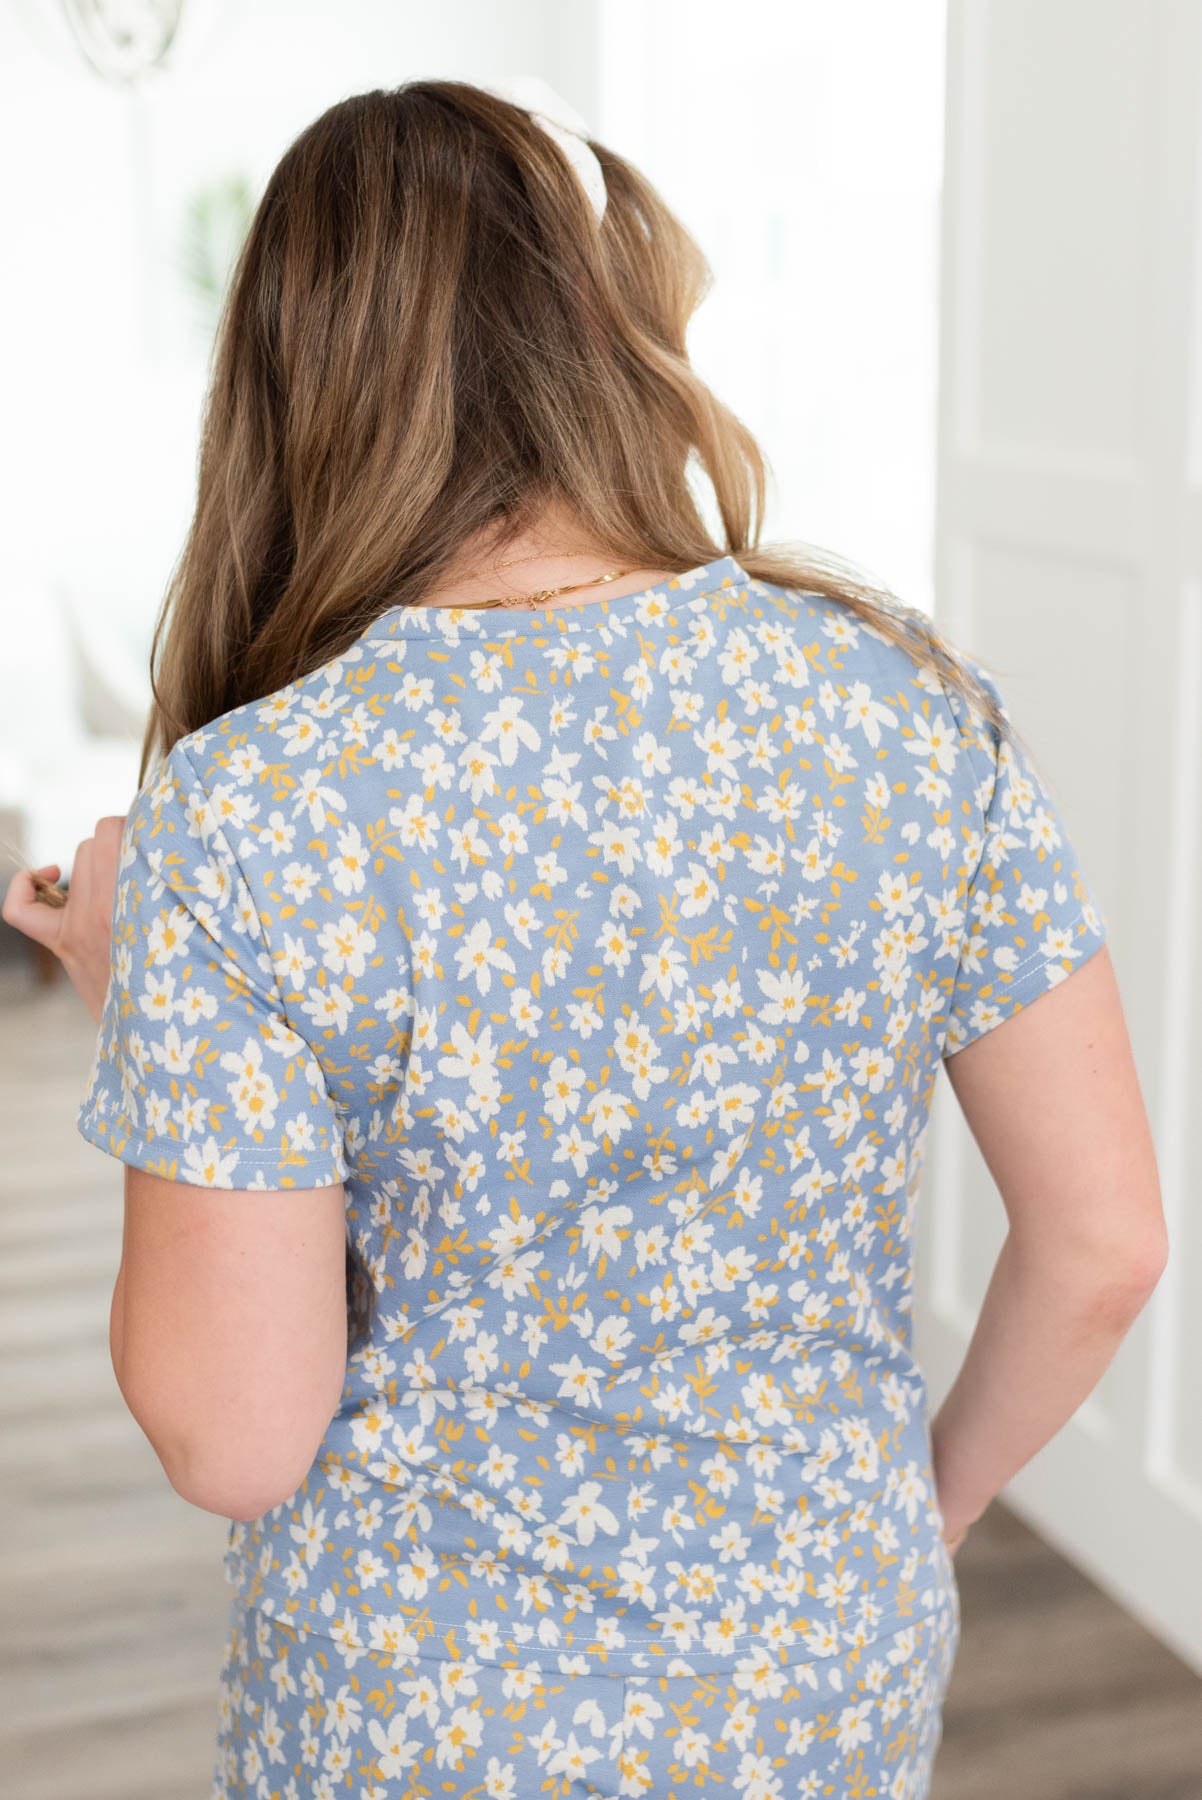 Back view of the blue floral top